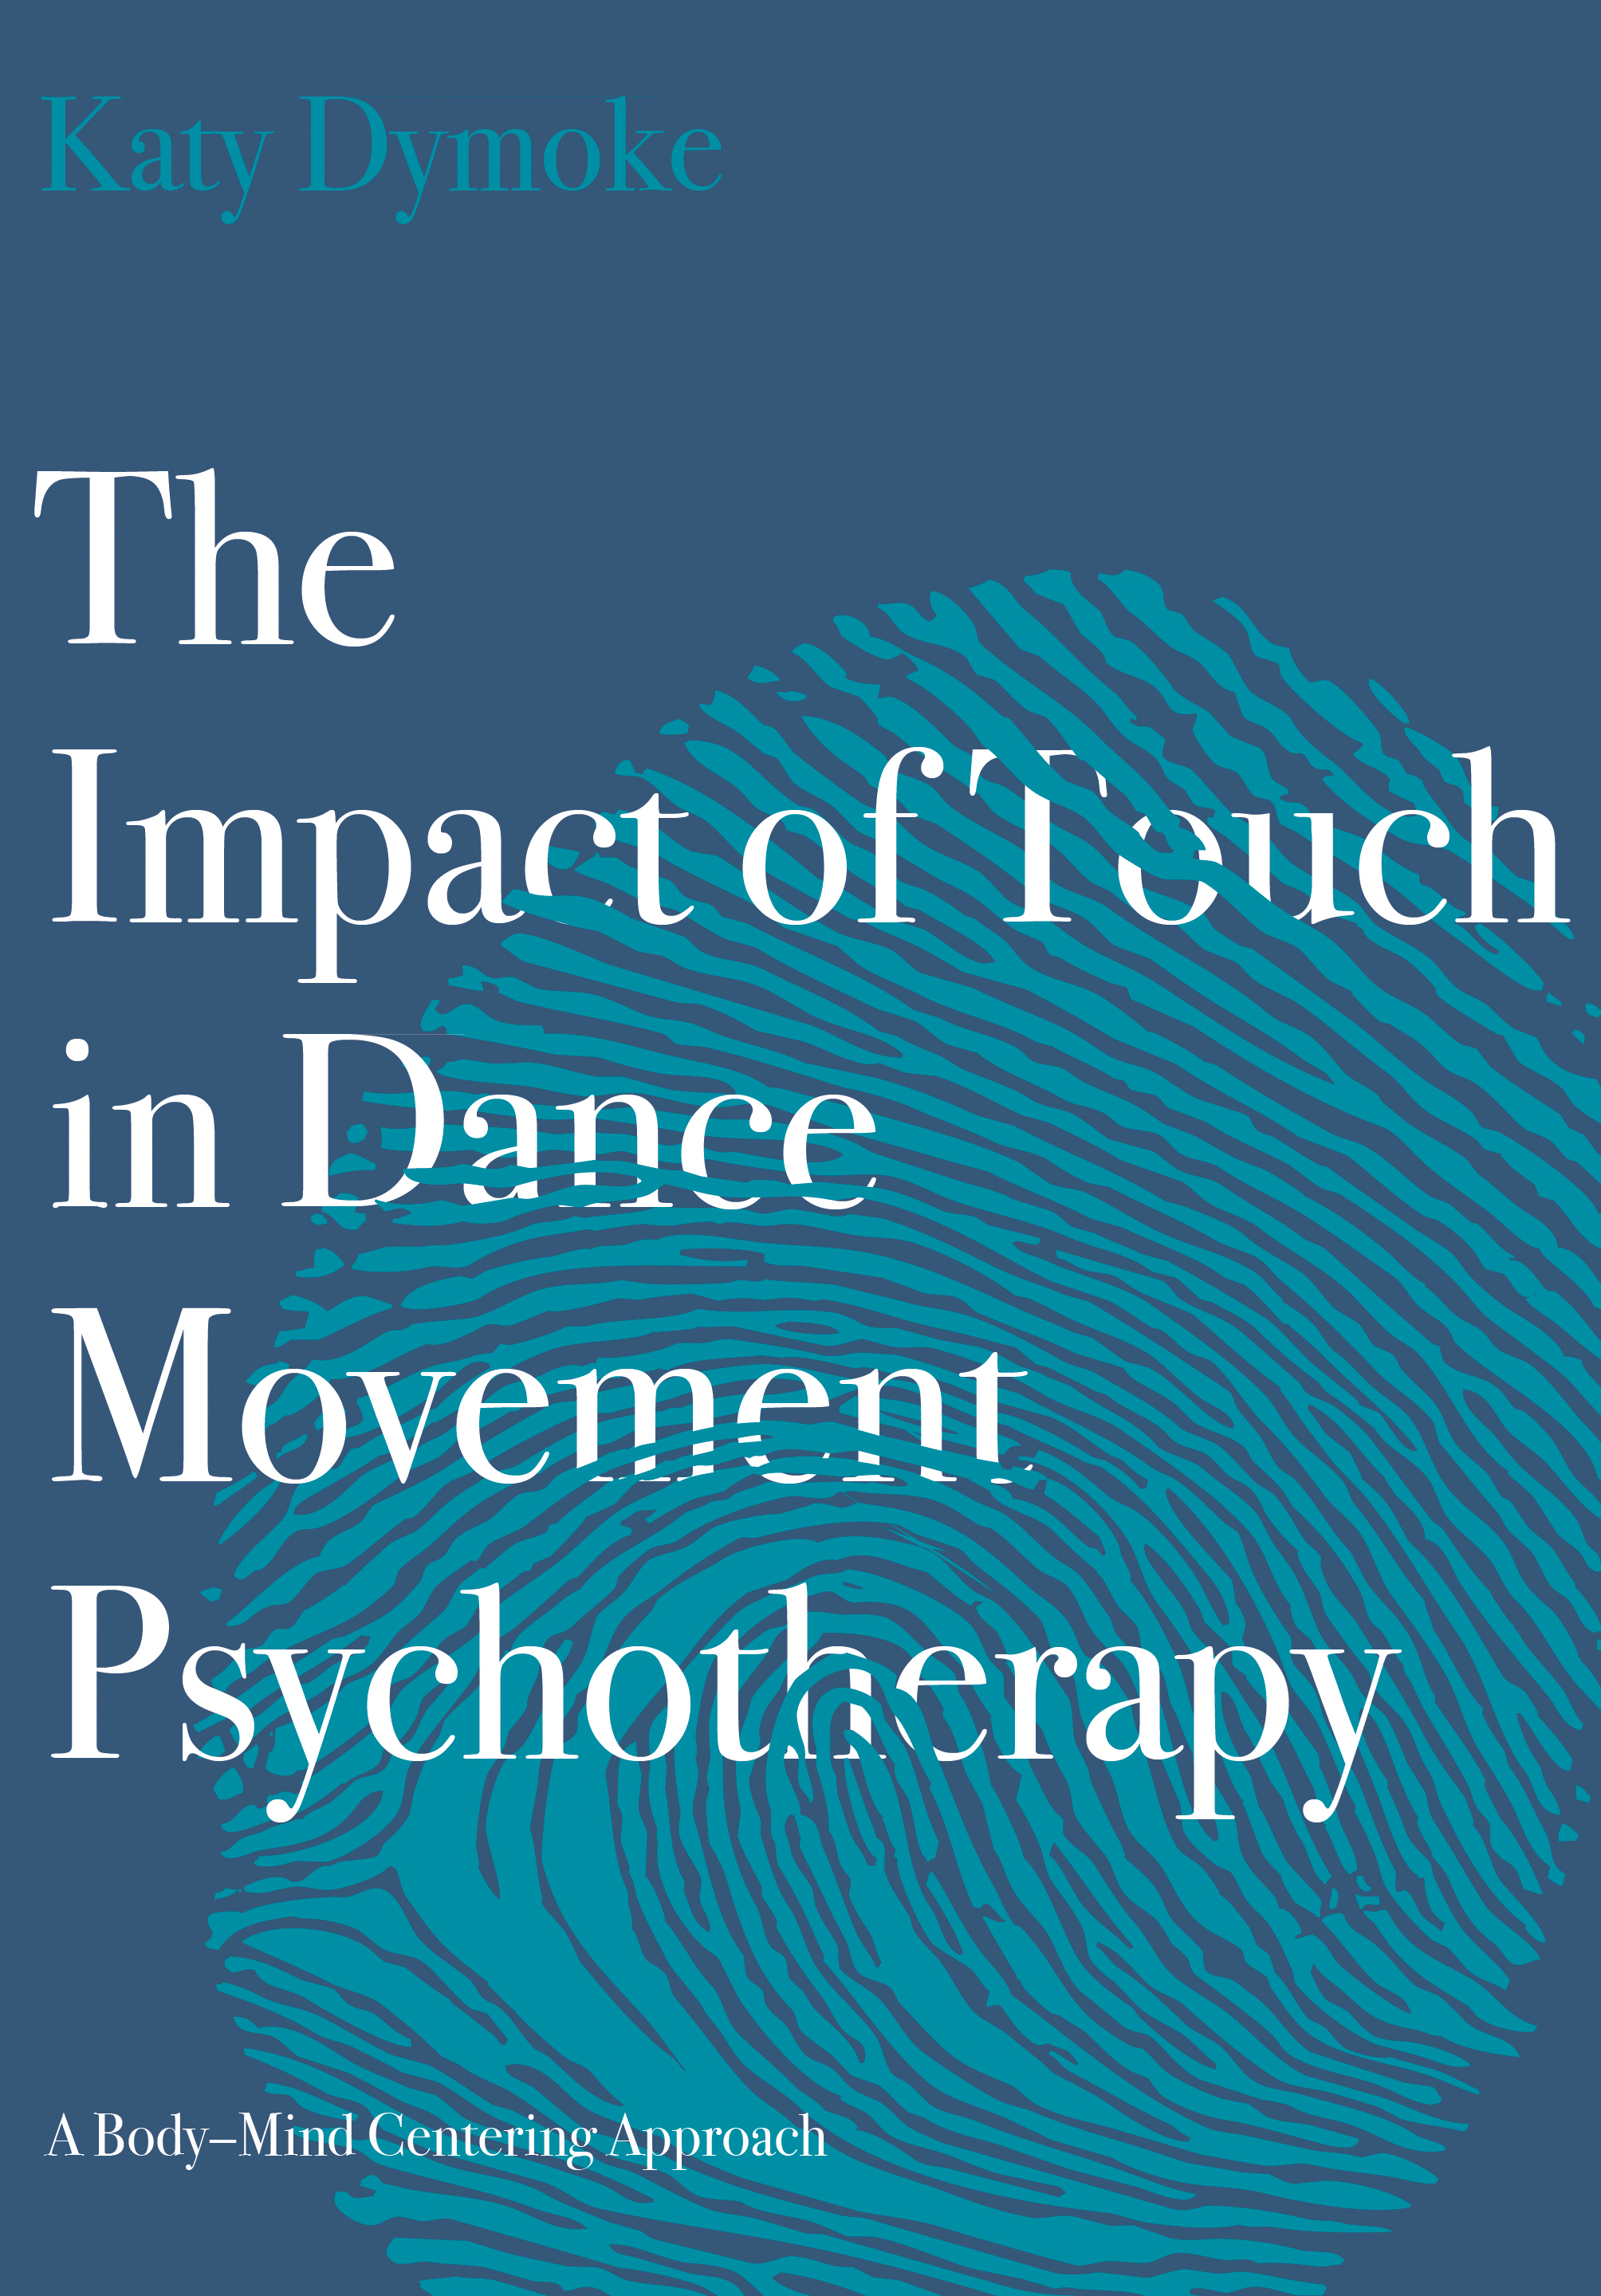 image of The Impact of Touch in Dance Movement Psychotherapy